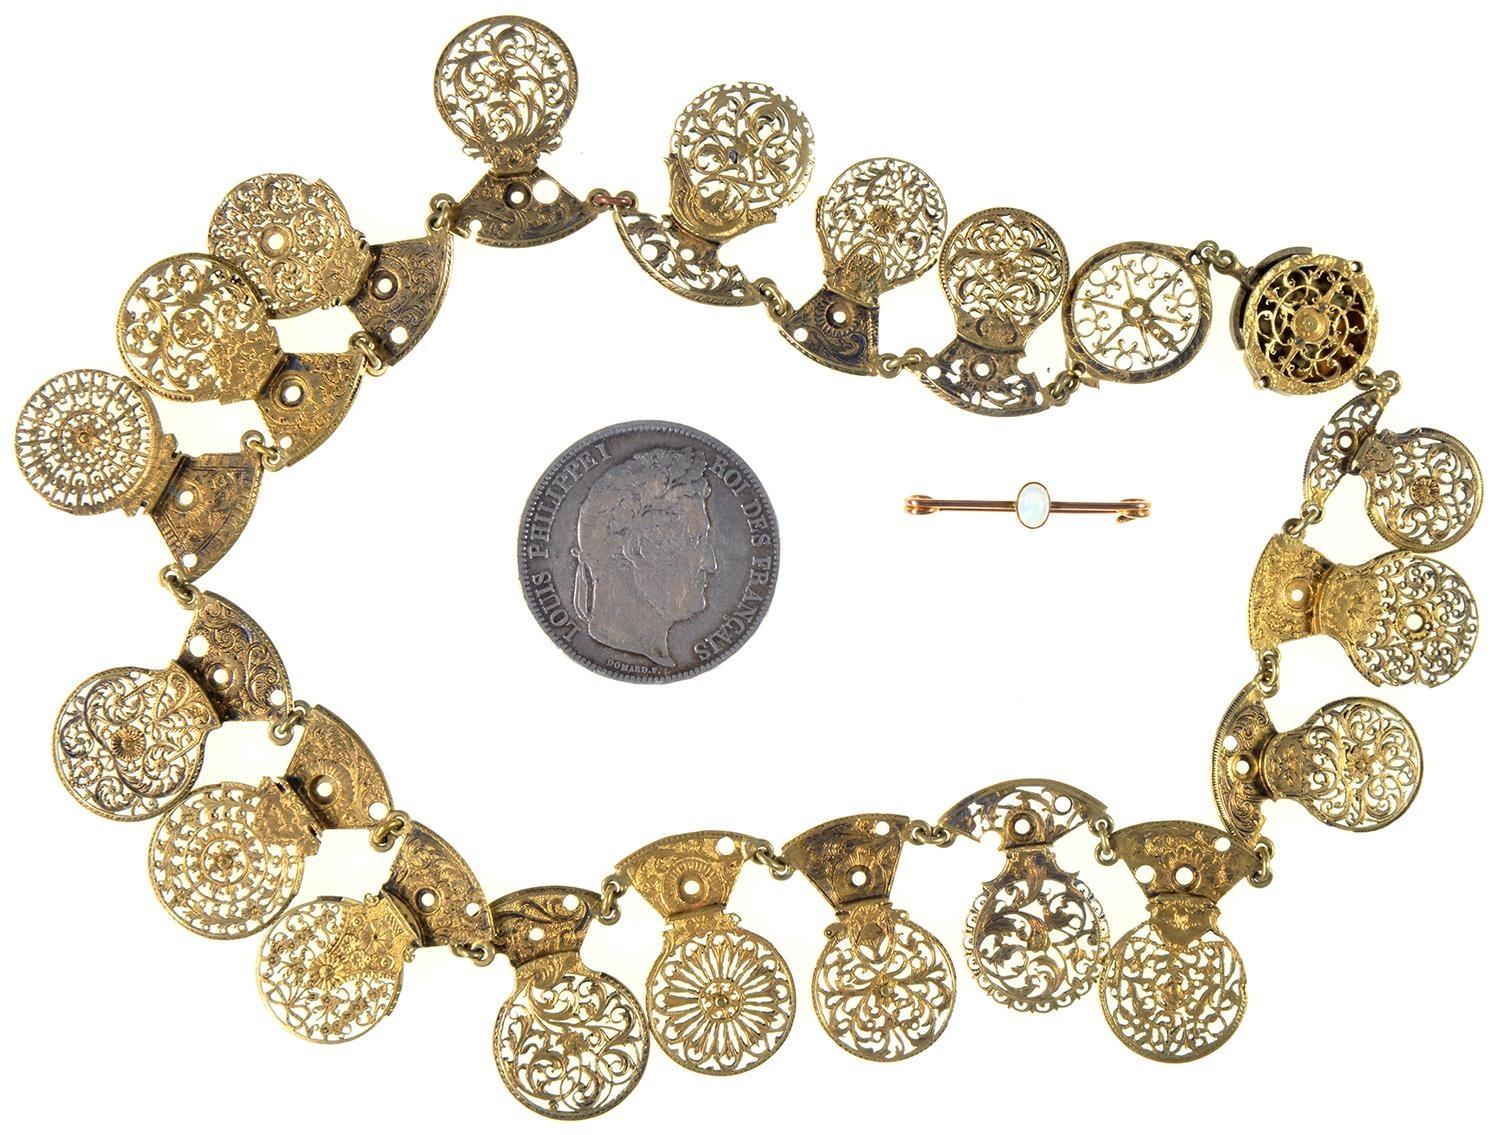 A NECKLACE COMPOSED OF ENGLISH PIERCED BRASS VERGE WATCH COCKS, 18TH AND EARLY 19TH C, EACH LINKED